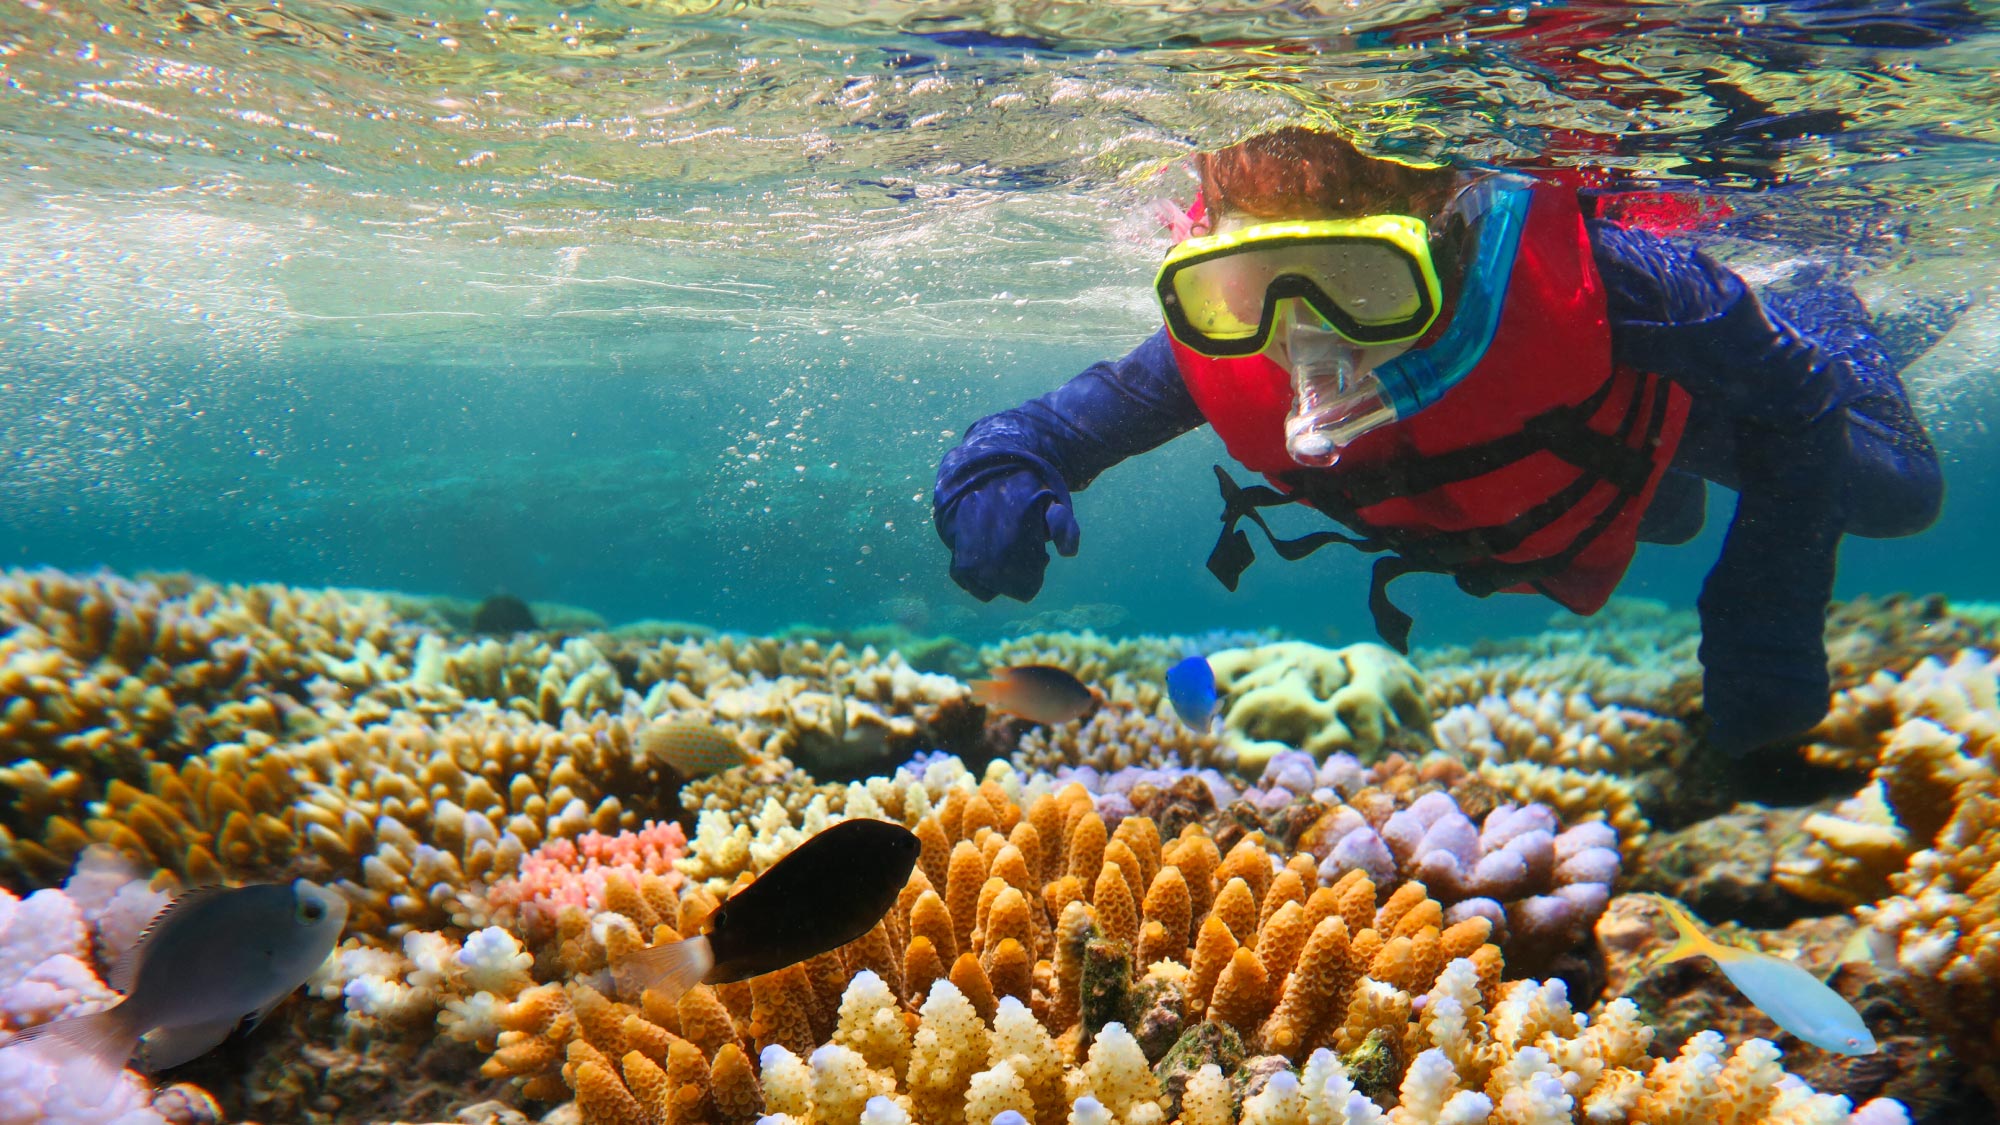 Explore the breathtaking Great Barrier Reef, a highlight of the journey to Australia spanning 21 countries, designed for self-flying pilots with a passion for adventure and exploration.